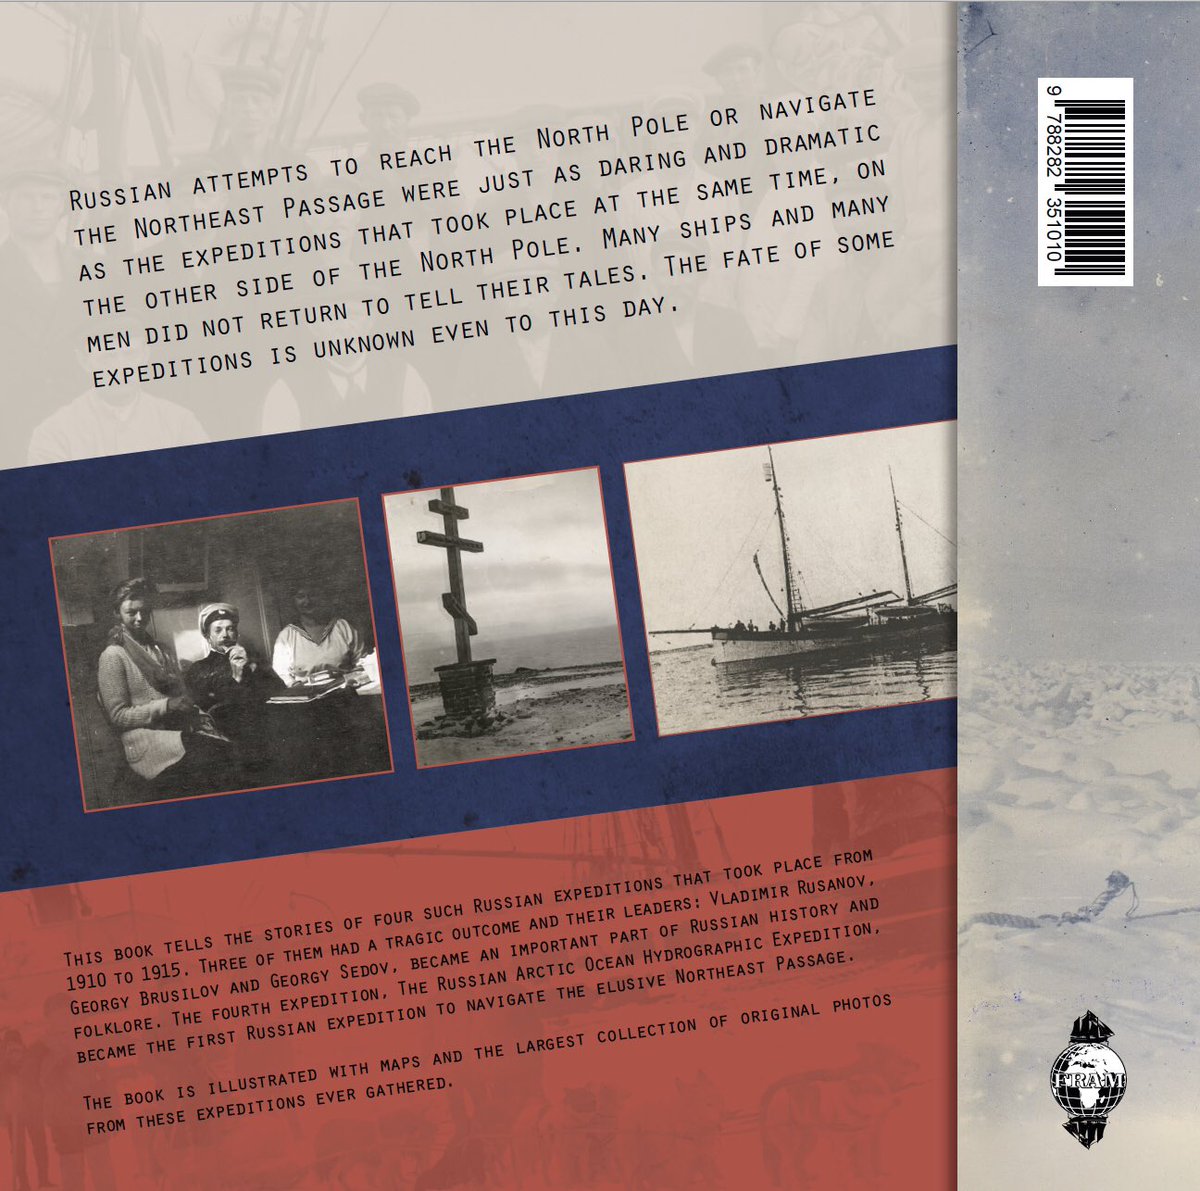 Our 11th book in the #explorersandexpeditions series is just sent to print. It is written by prolific polar historian William Barr and deals with Russian attempta to reach #northpole & sail #northernsearoute 1910-15. Exciting stuff. #polarbooks #frammuseet